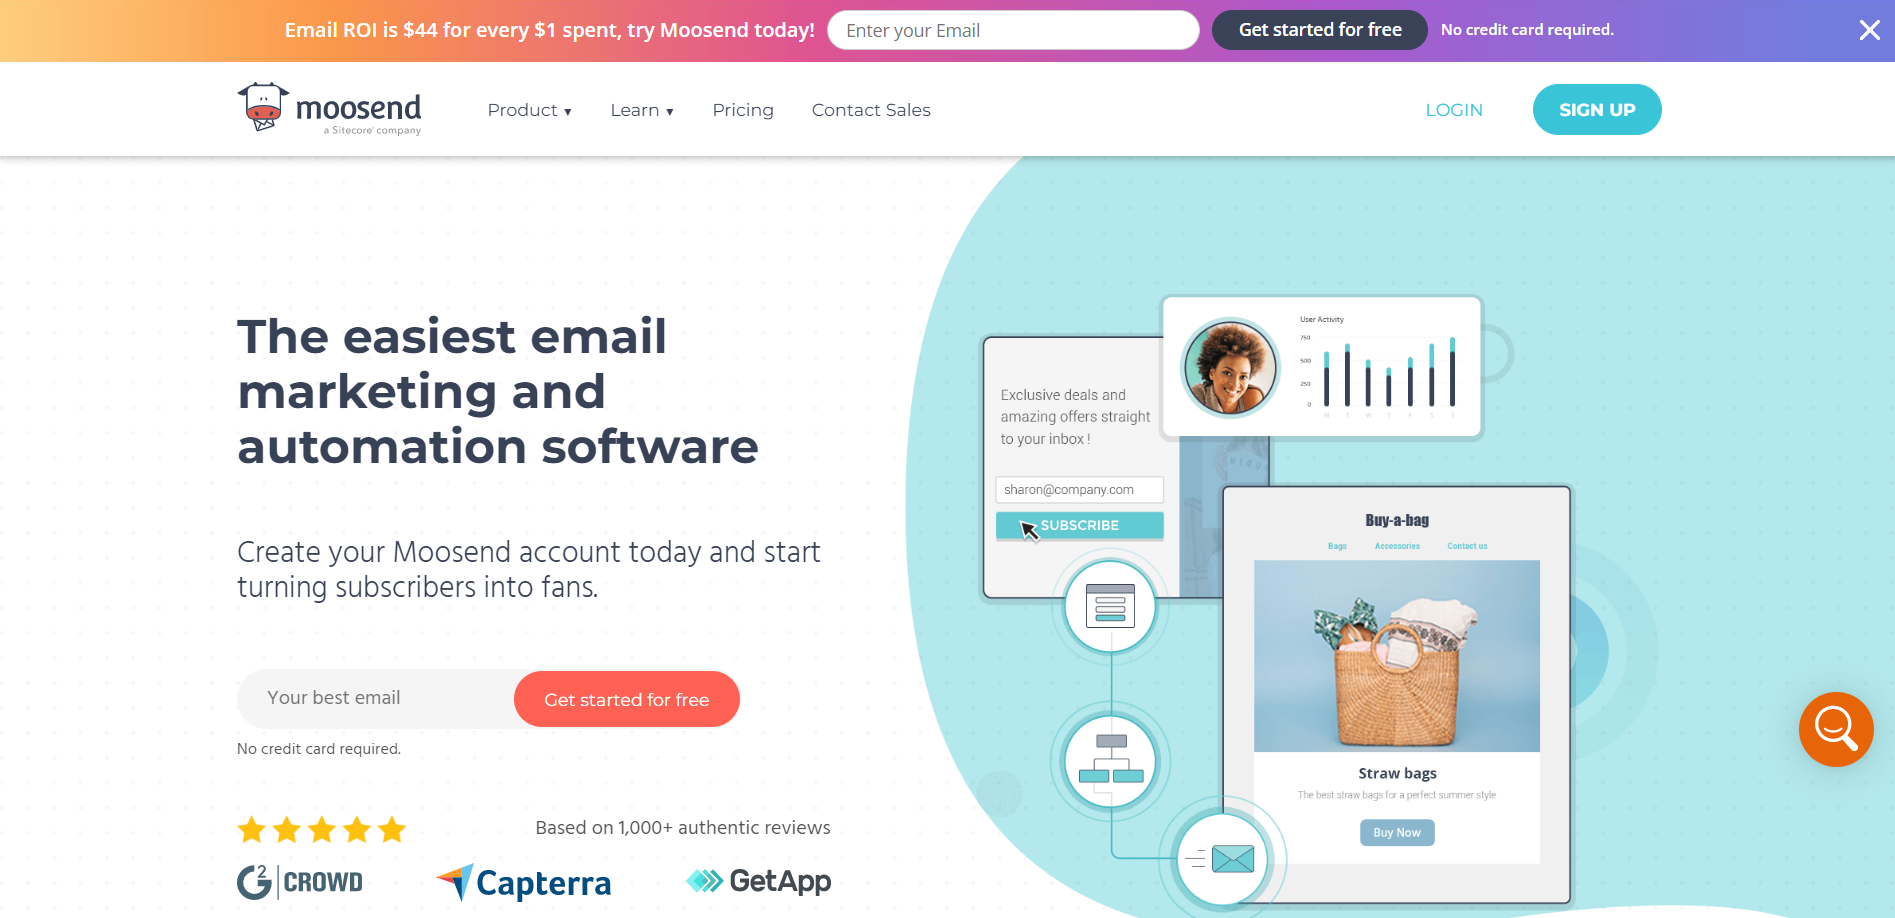 Moosend as a transactional email service provider